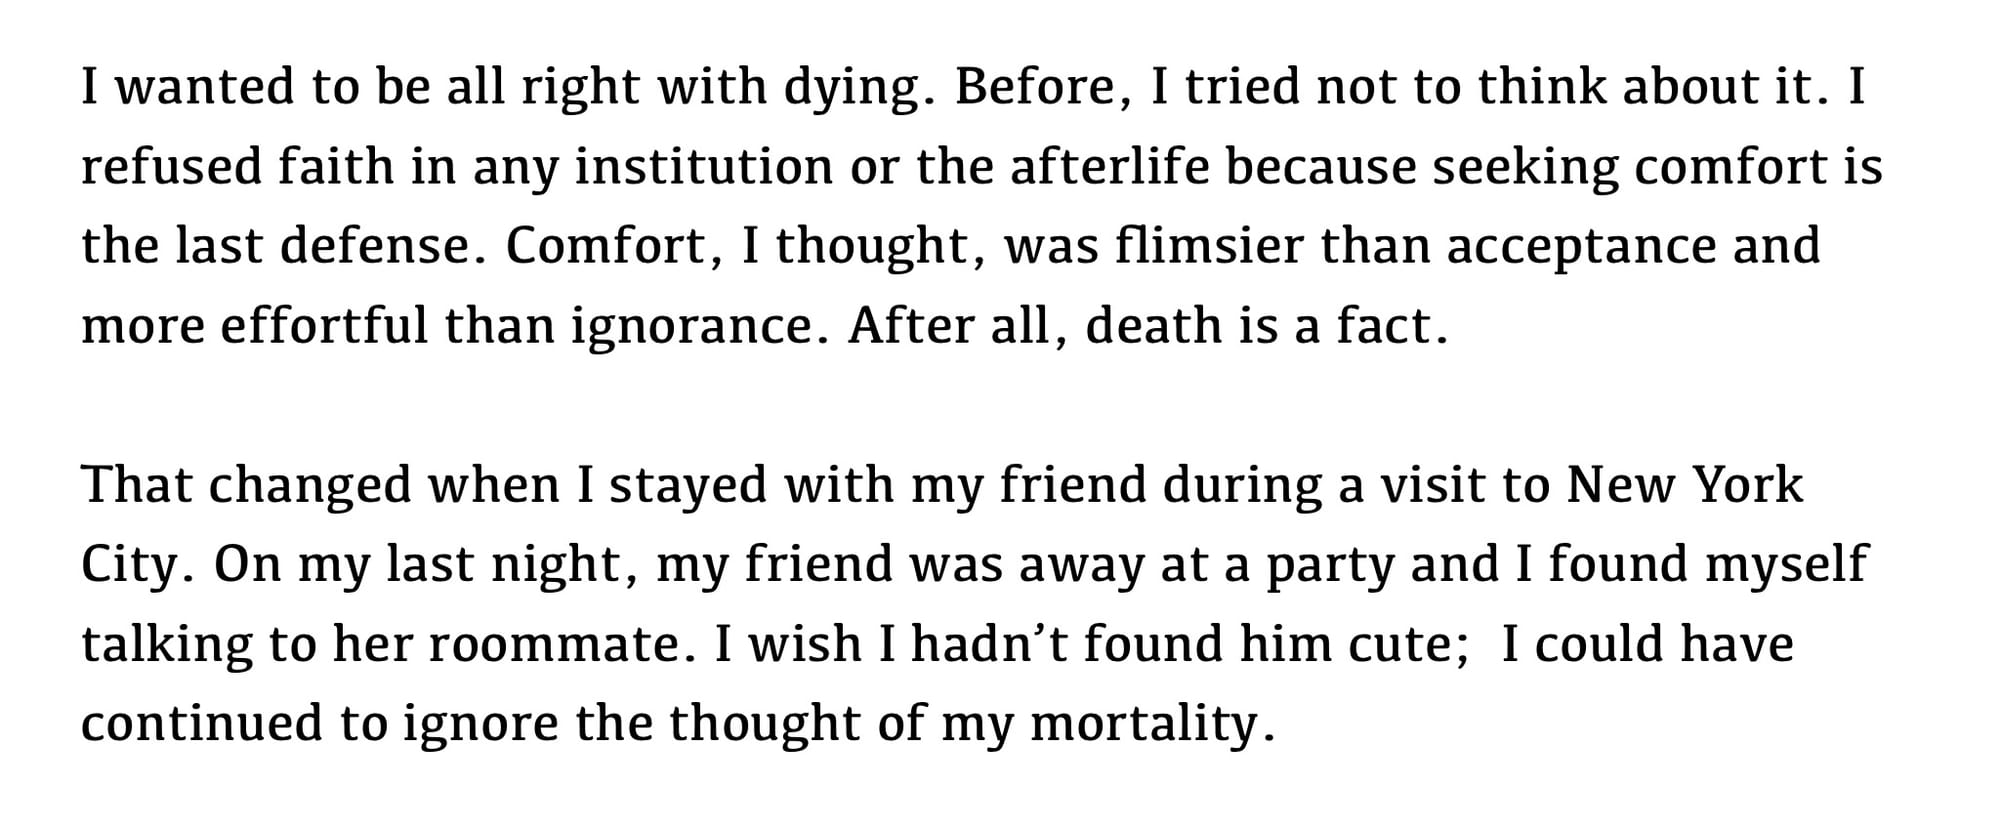 text only: I wanted to be all right with dying. Before, I tried not to think about it. I refused faith in any institution or the afterlife because seeking comfort is the last defense. Comfort, I thought, was flimsier than acceptance and more effortful than ignorance. After all, death is a fact.